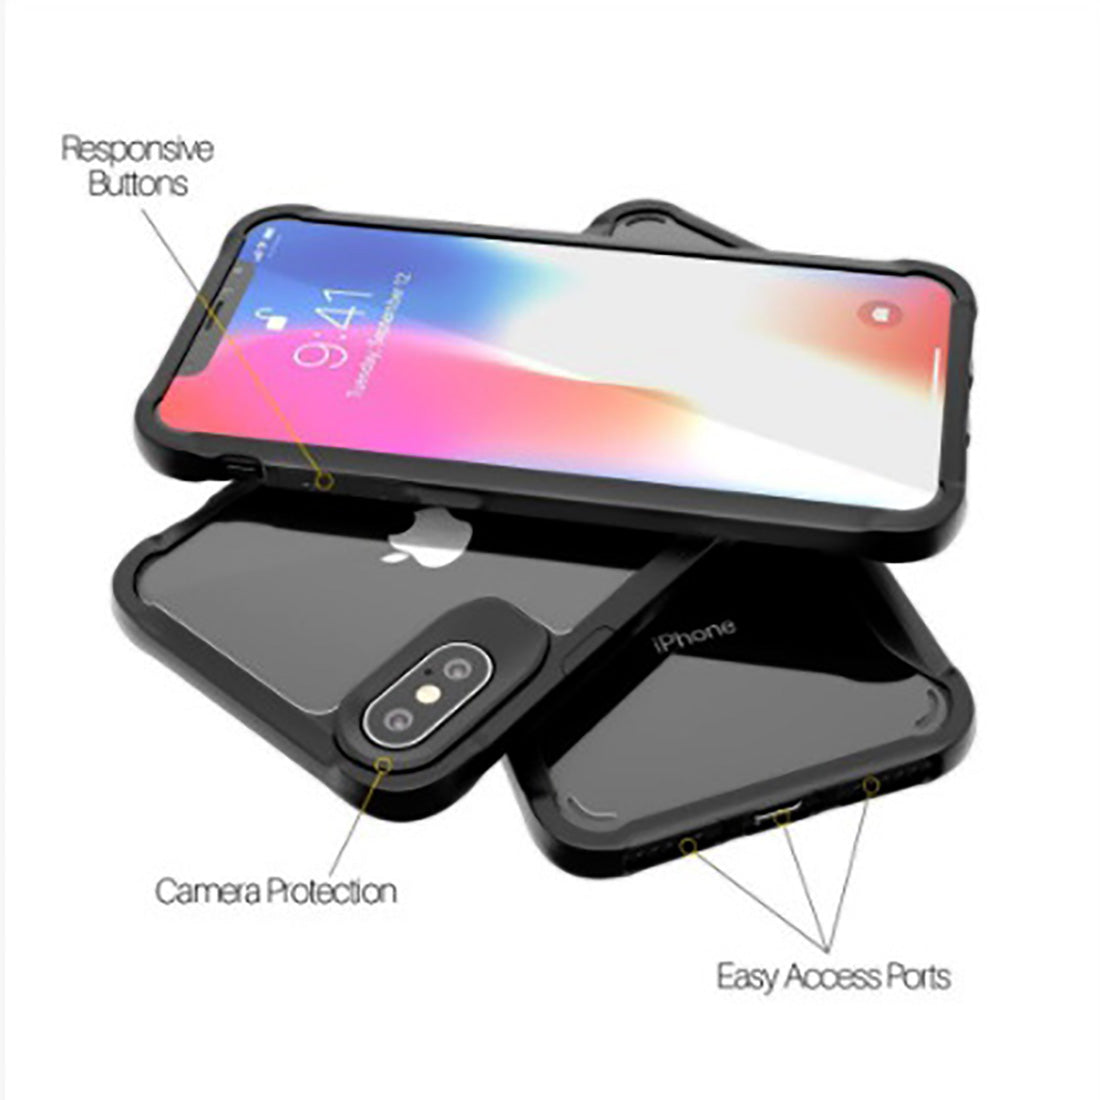 Shockproof Hybrid Cover for Apple iPhone X / Xs